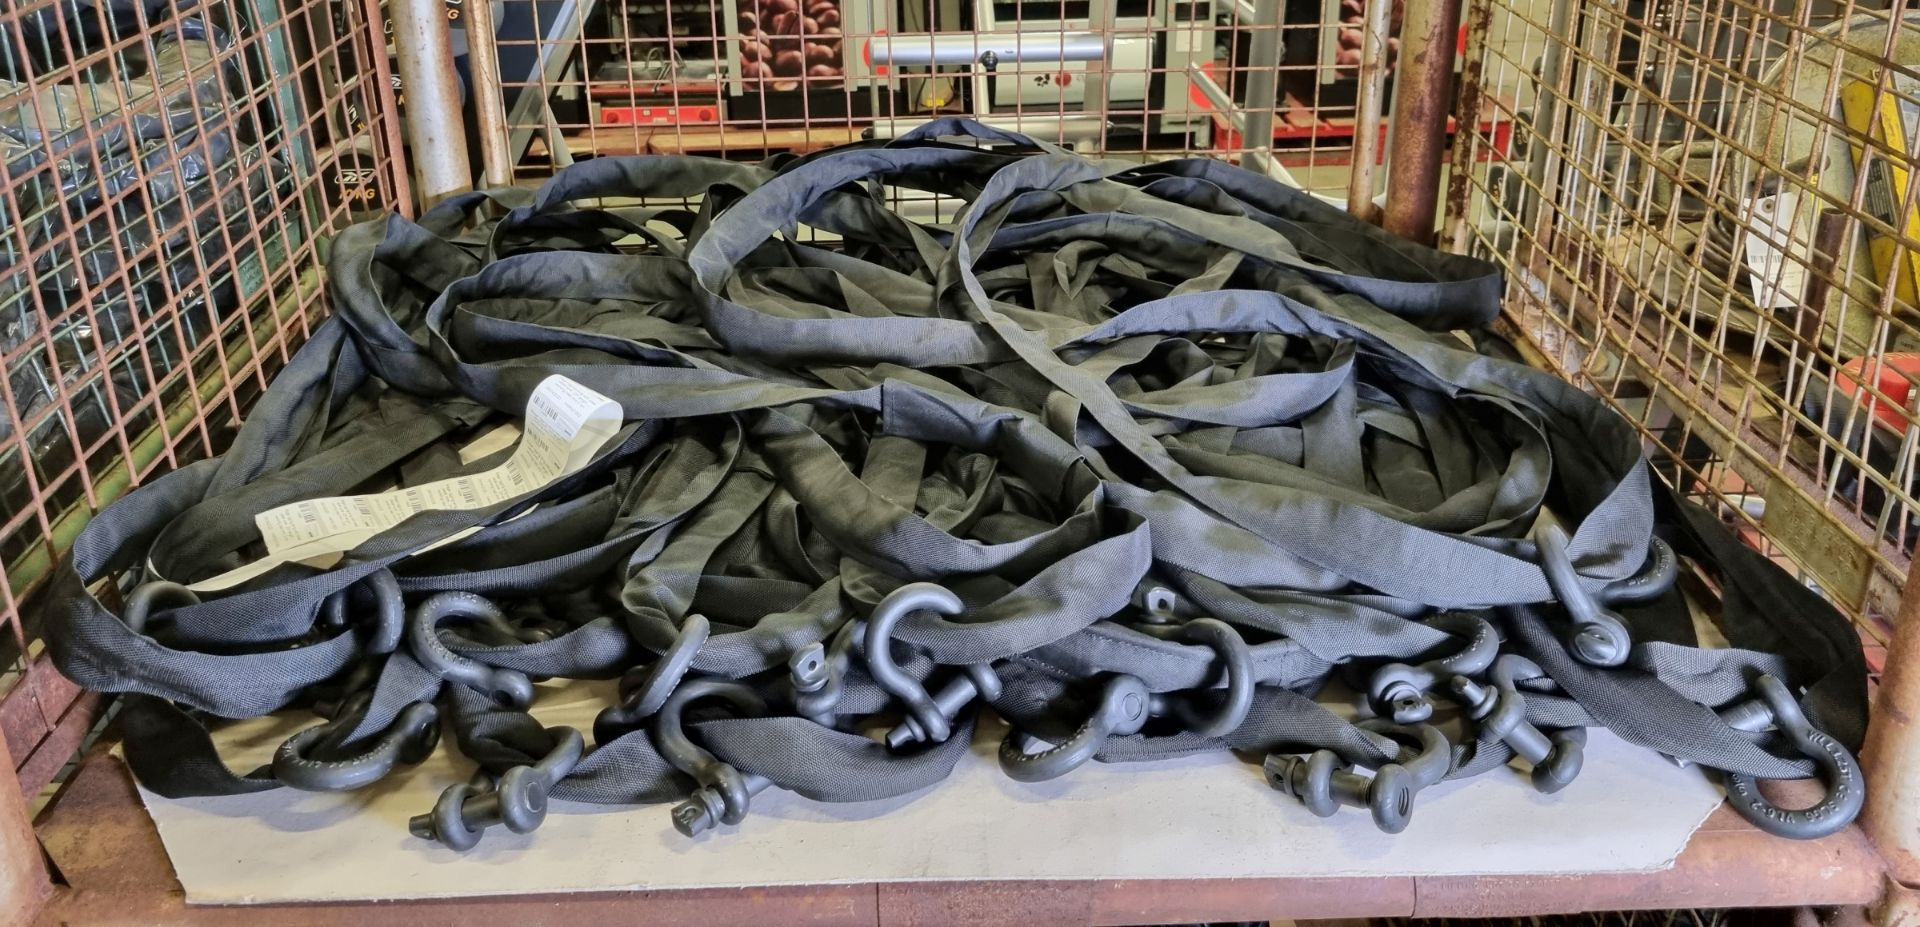 18x Stage rigging slings with steel cable core - 2m length - working load limit 2 ton - Bild 2 aus 3